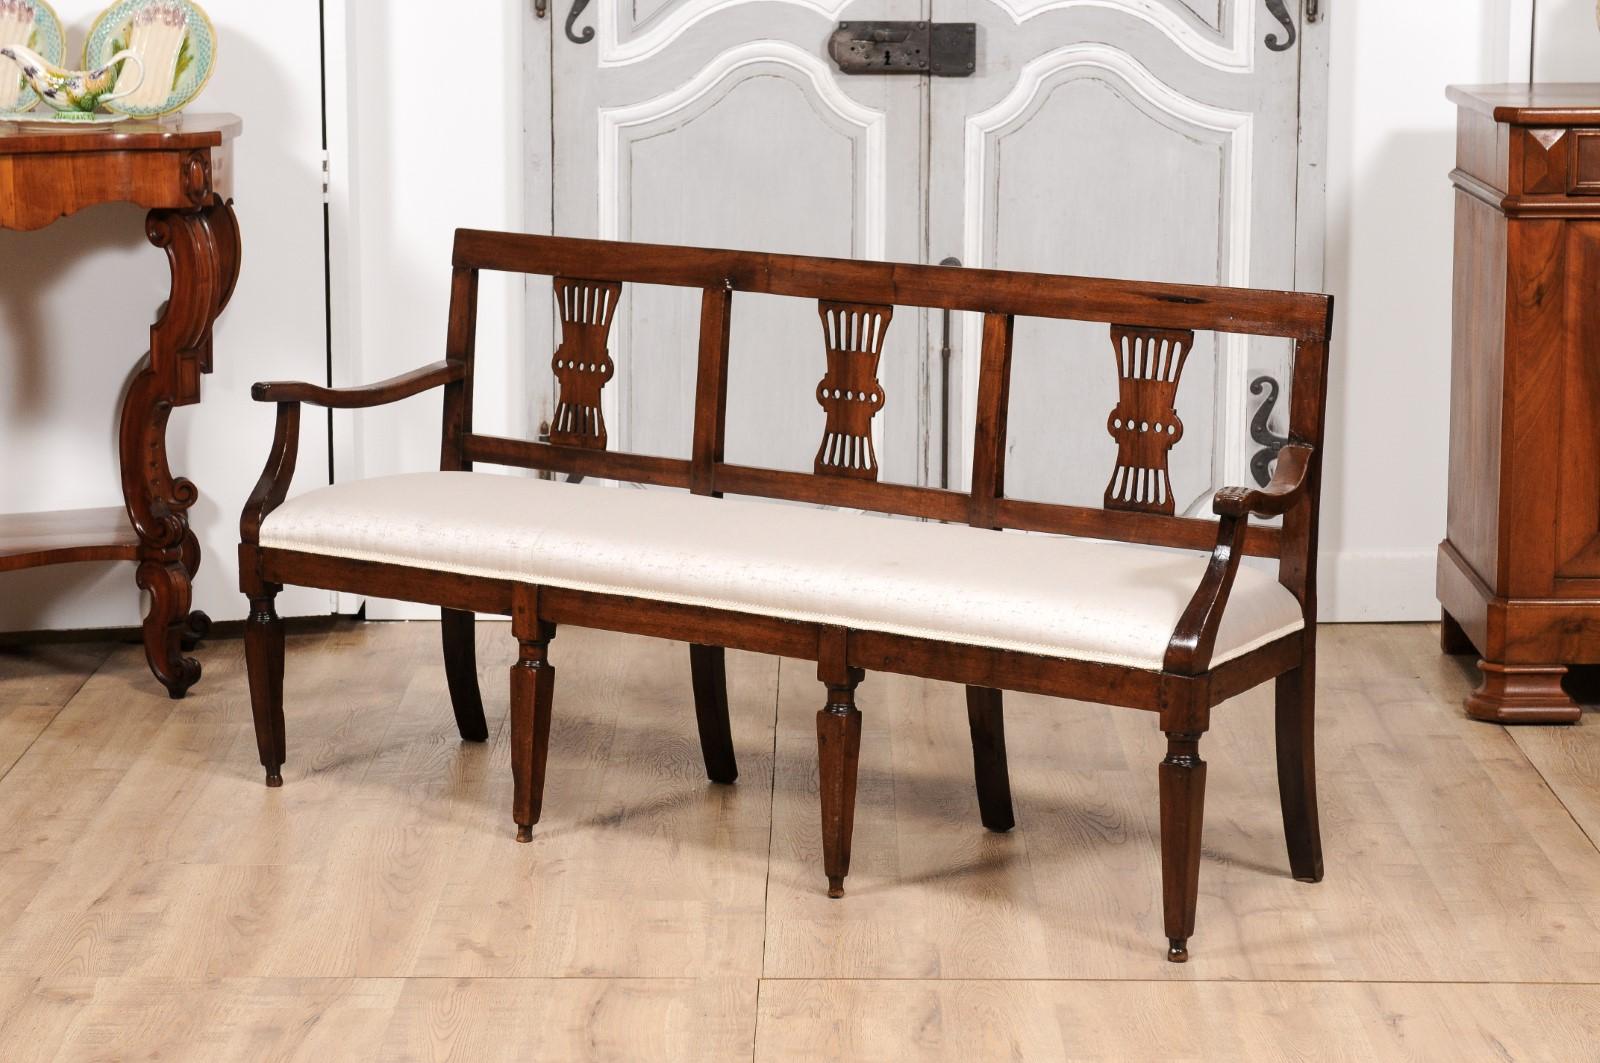 Italian 19th Century Walnut Three-Seater Bench with Carved Splats and Upholstery For Sale 7